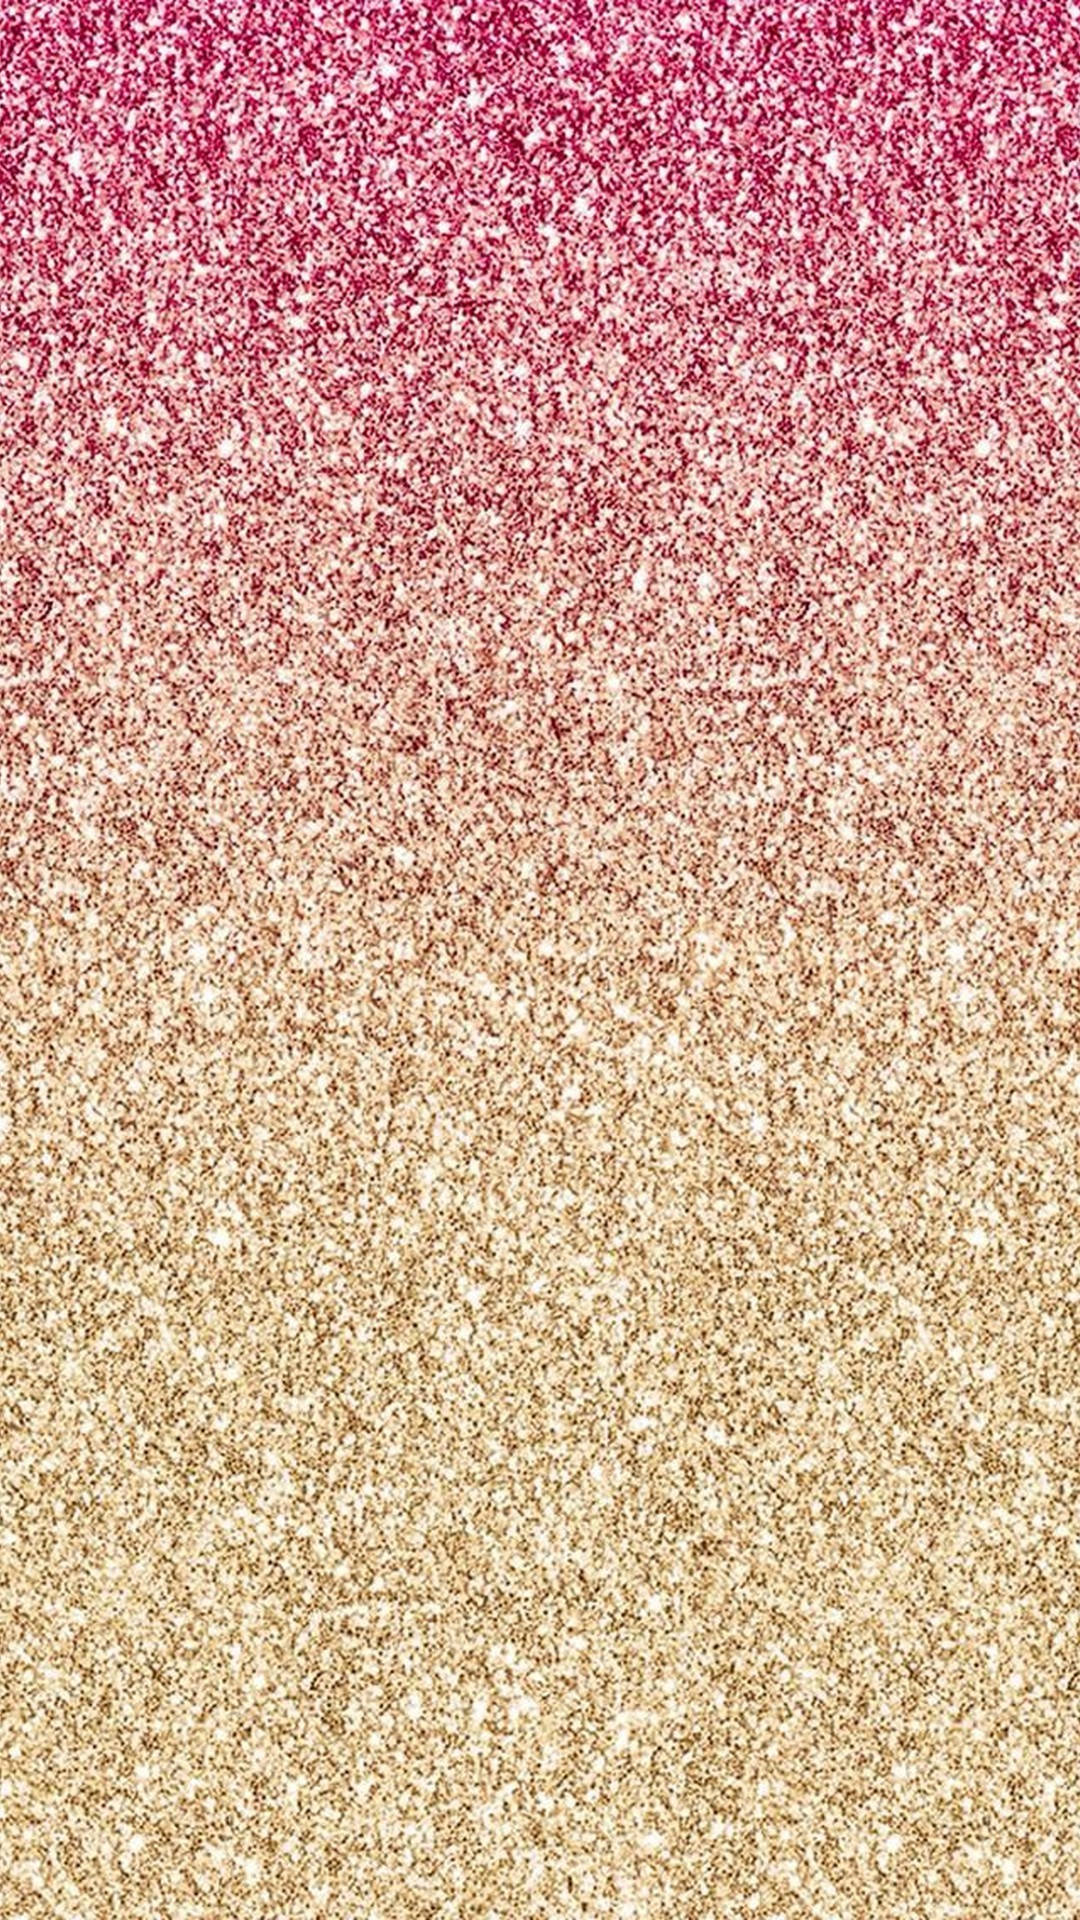 Pink And Gold Glitter Girly Iphone Background